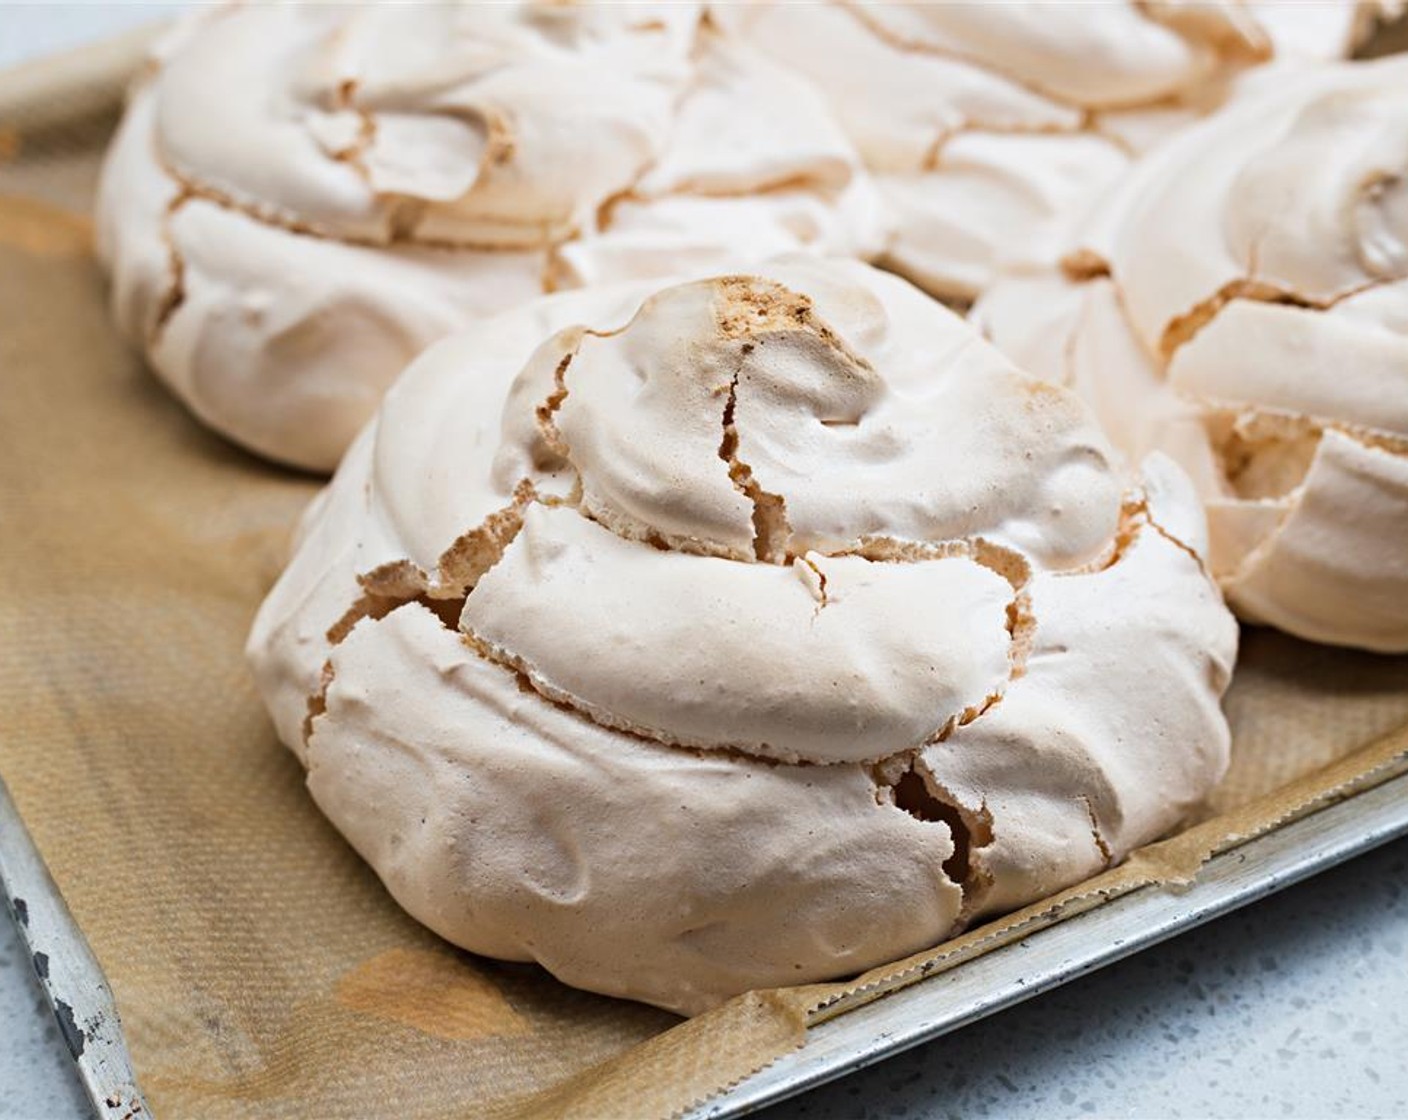 step 11 Remove meringues from baking tray. Serve and enjoy!